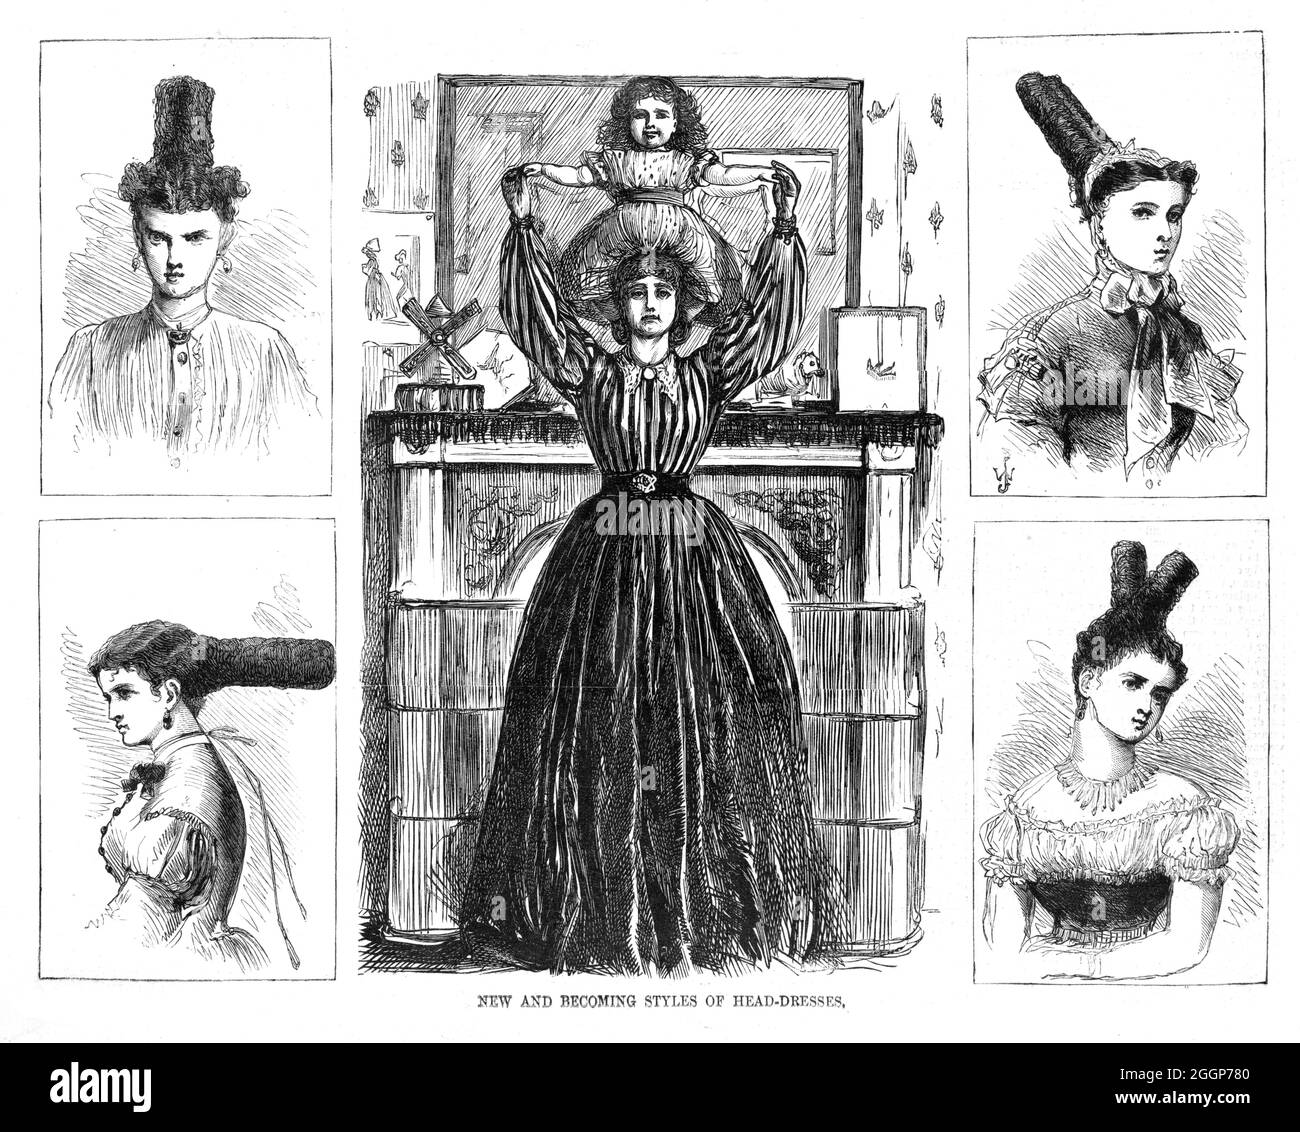 New and Becoming Styles of Headdresses, satirical cartoon by Thomas Nast (1840-1902). At center, a woman is holding a child on top of her head, surrounded by four vignette views of 'new' hairstyles. Harper's Weekly, 1867. Stock Photo